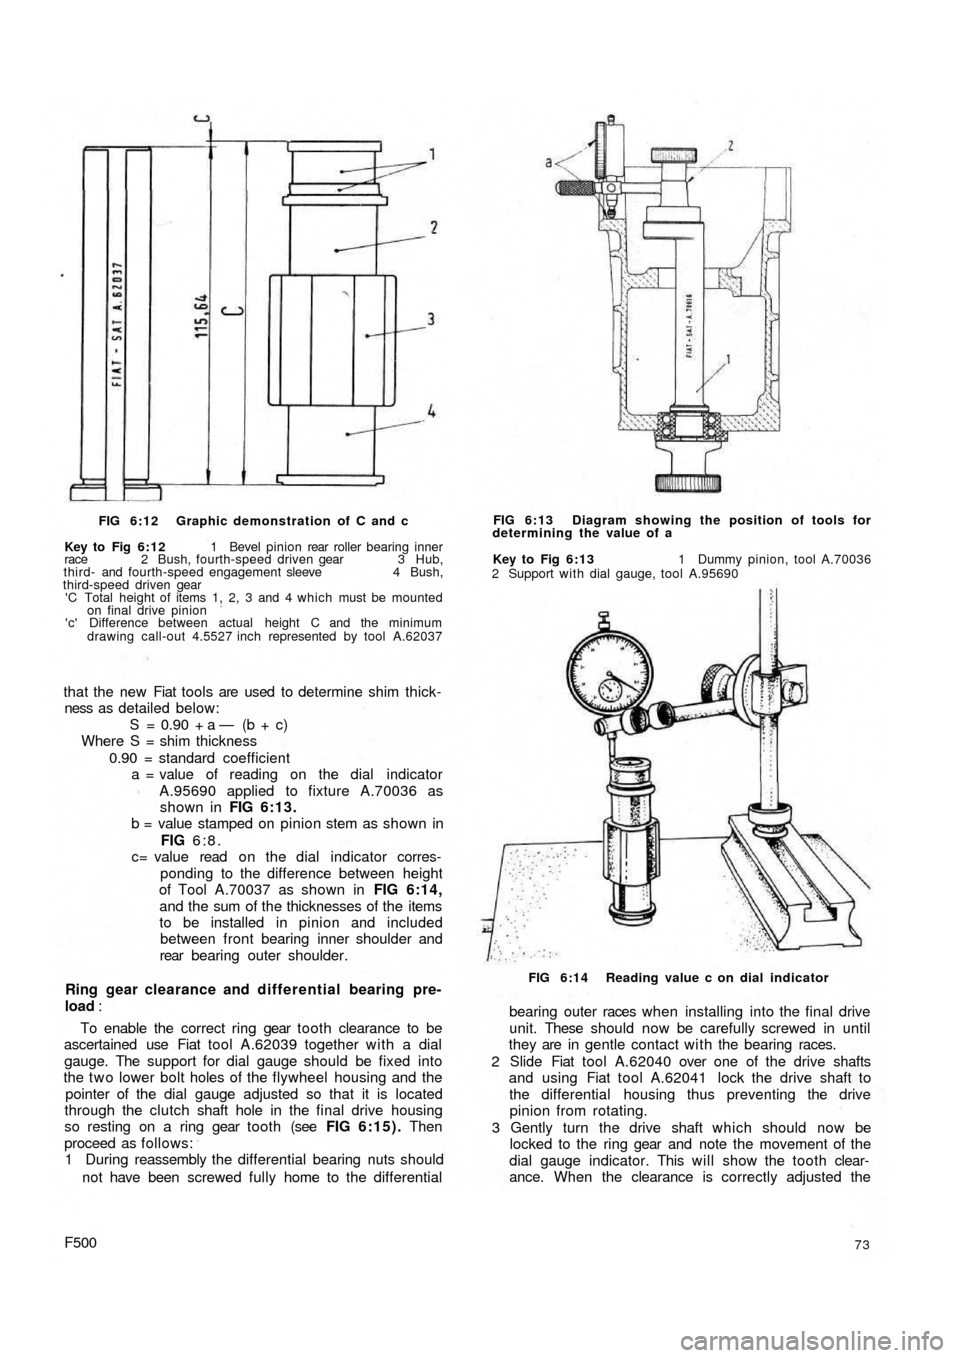 FIAT 500 1970 1.G Workshop Manual FIG 6:12 Graphic demonstration  of C and c
Key to Fig 6:12 1 Bevel pinion rear roller bearing inner
race 2 Bush, fourth-speed driven gear 3 Hub,
third- and fourth-speed engagement sleeve 4 Bush,
third